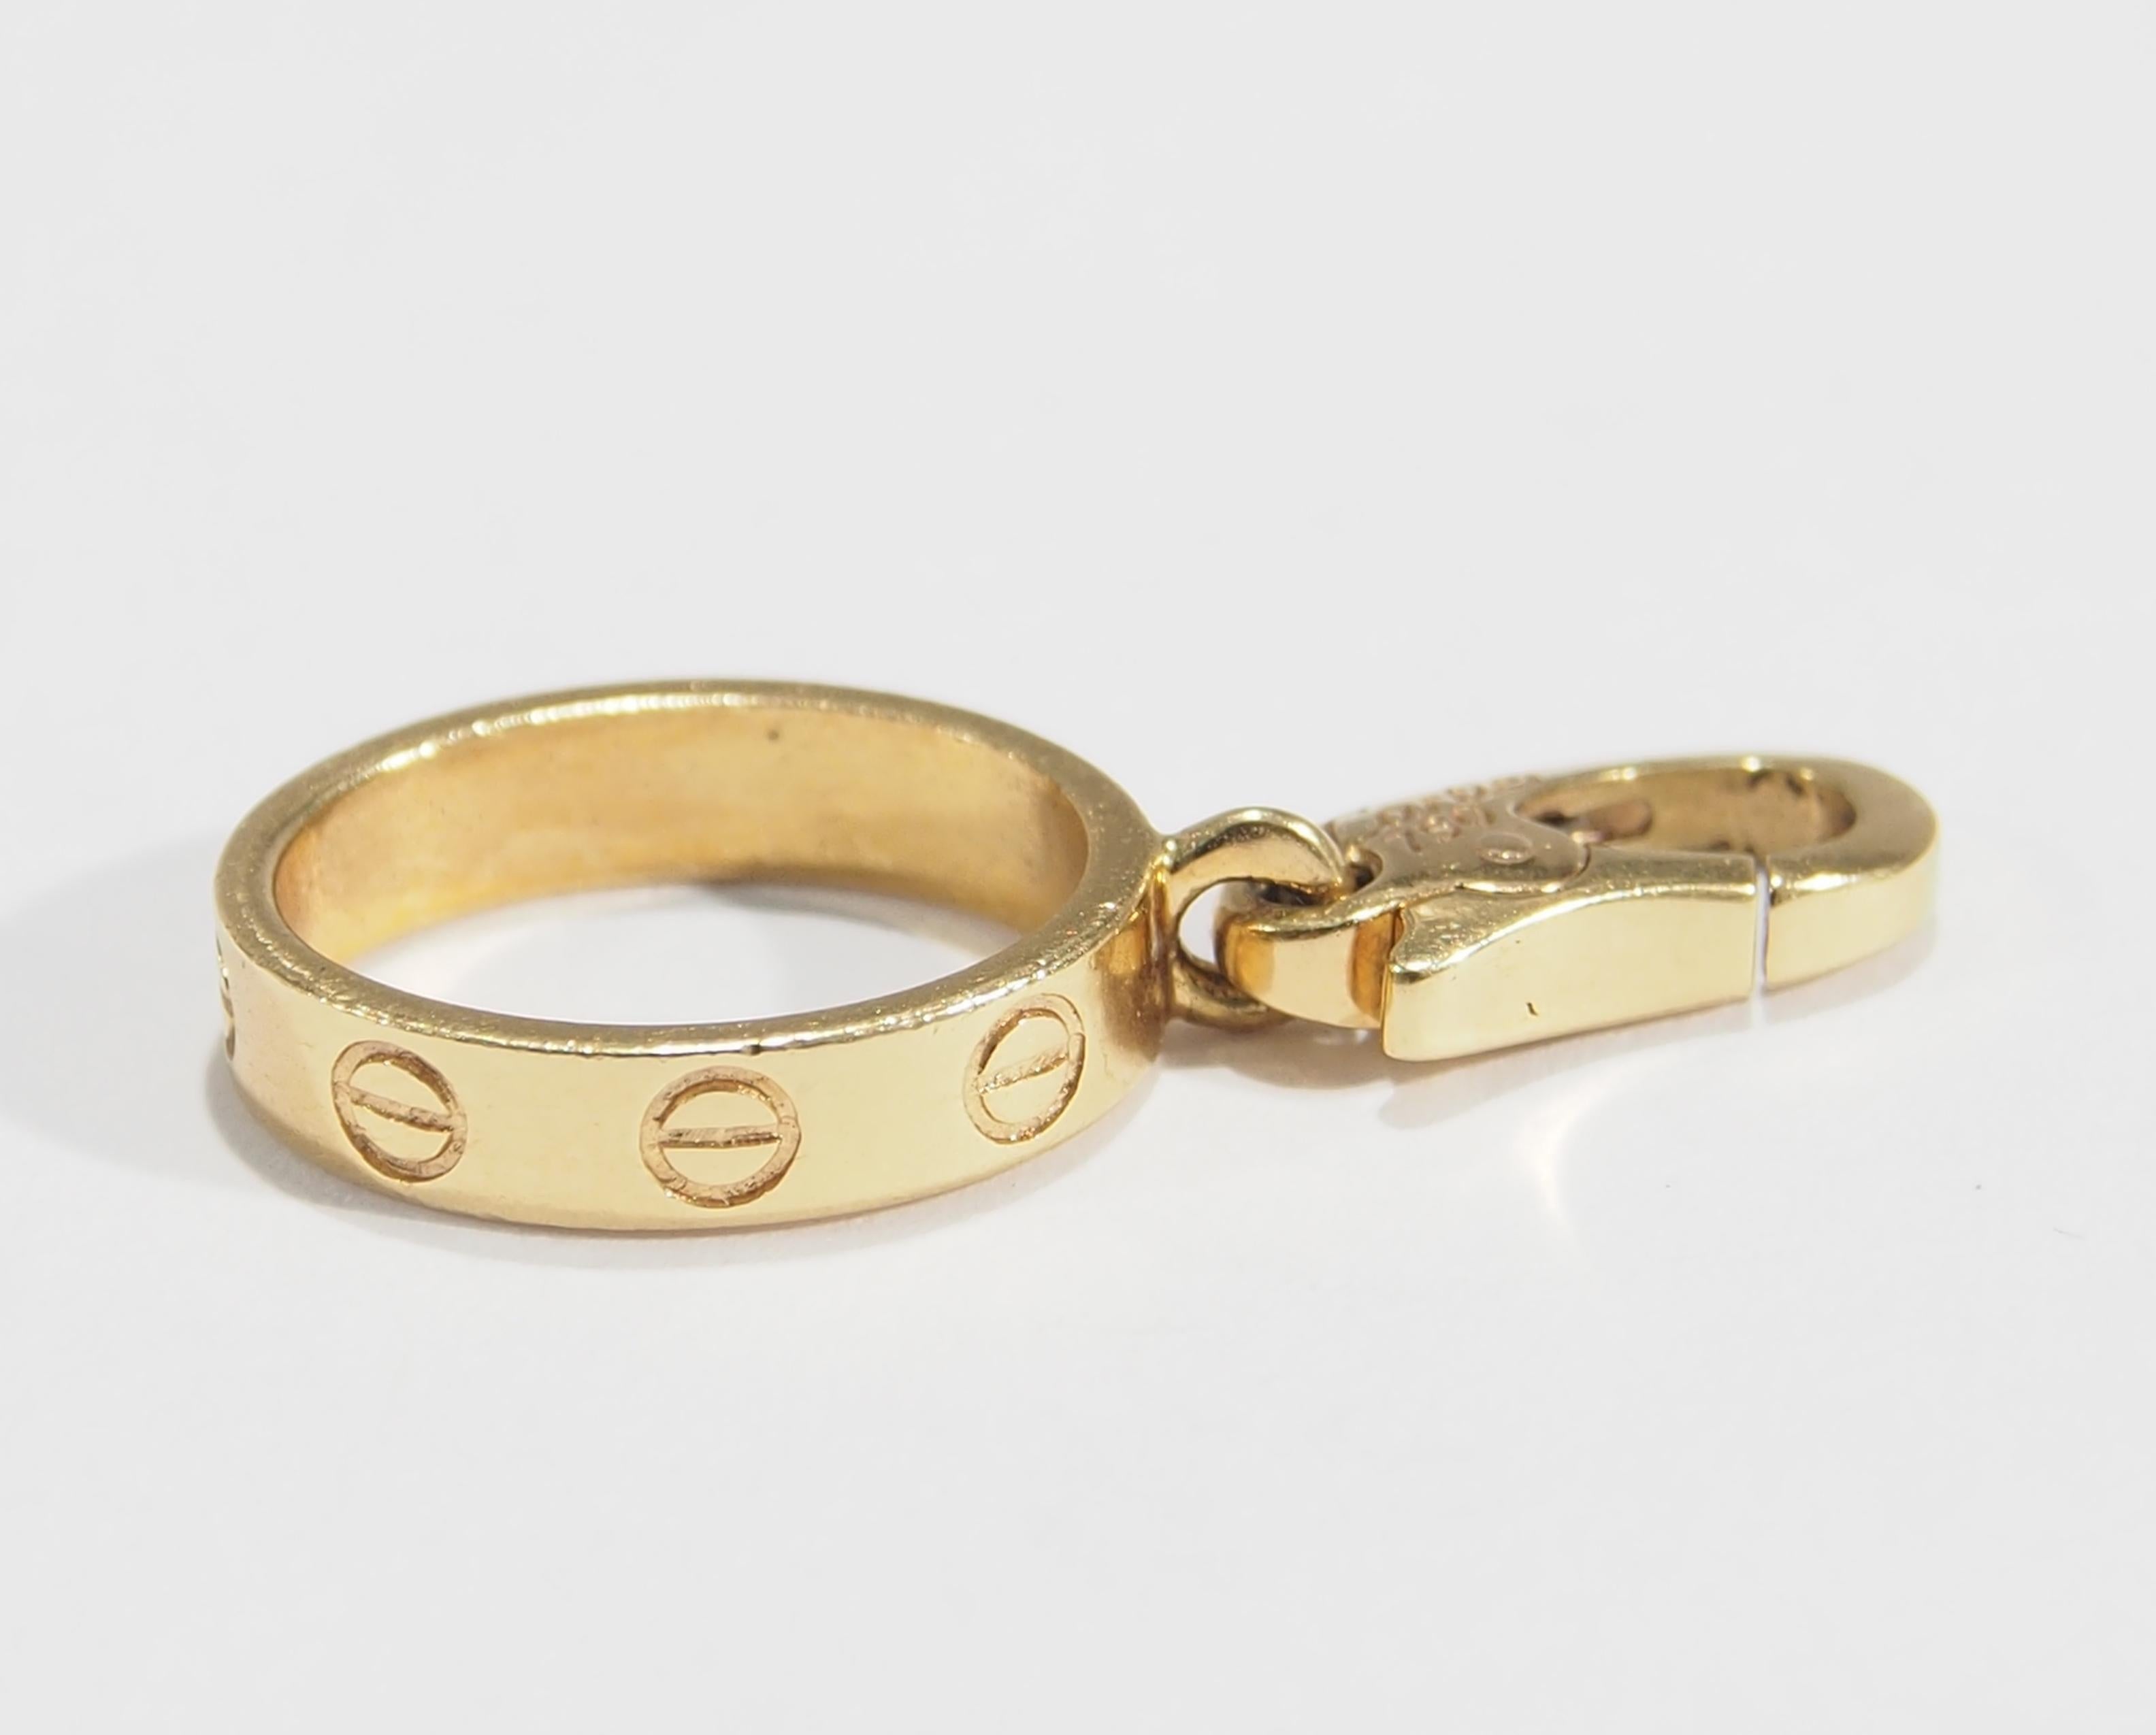 From the iconic designer Cartier, is their delightful 18K Yellow Gold Love Ring Charm created for their charm collection to enhance either their bracelets or necklaces. Designed with precious detail the Charm measures 1 inch in length and 3/8 inch